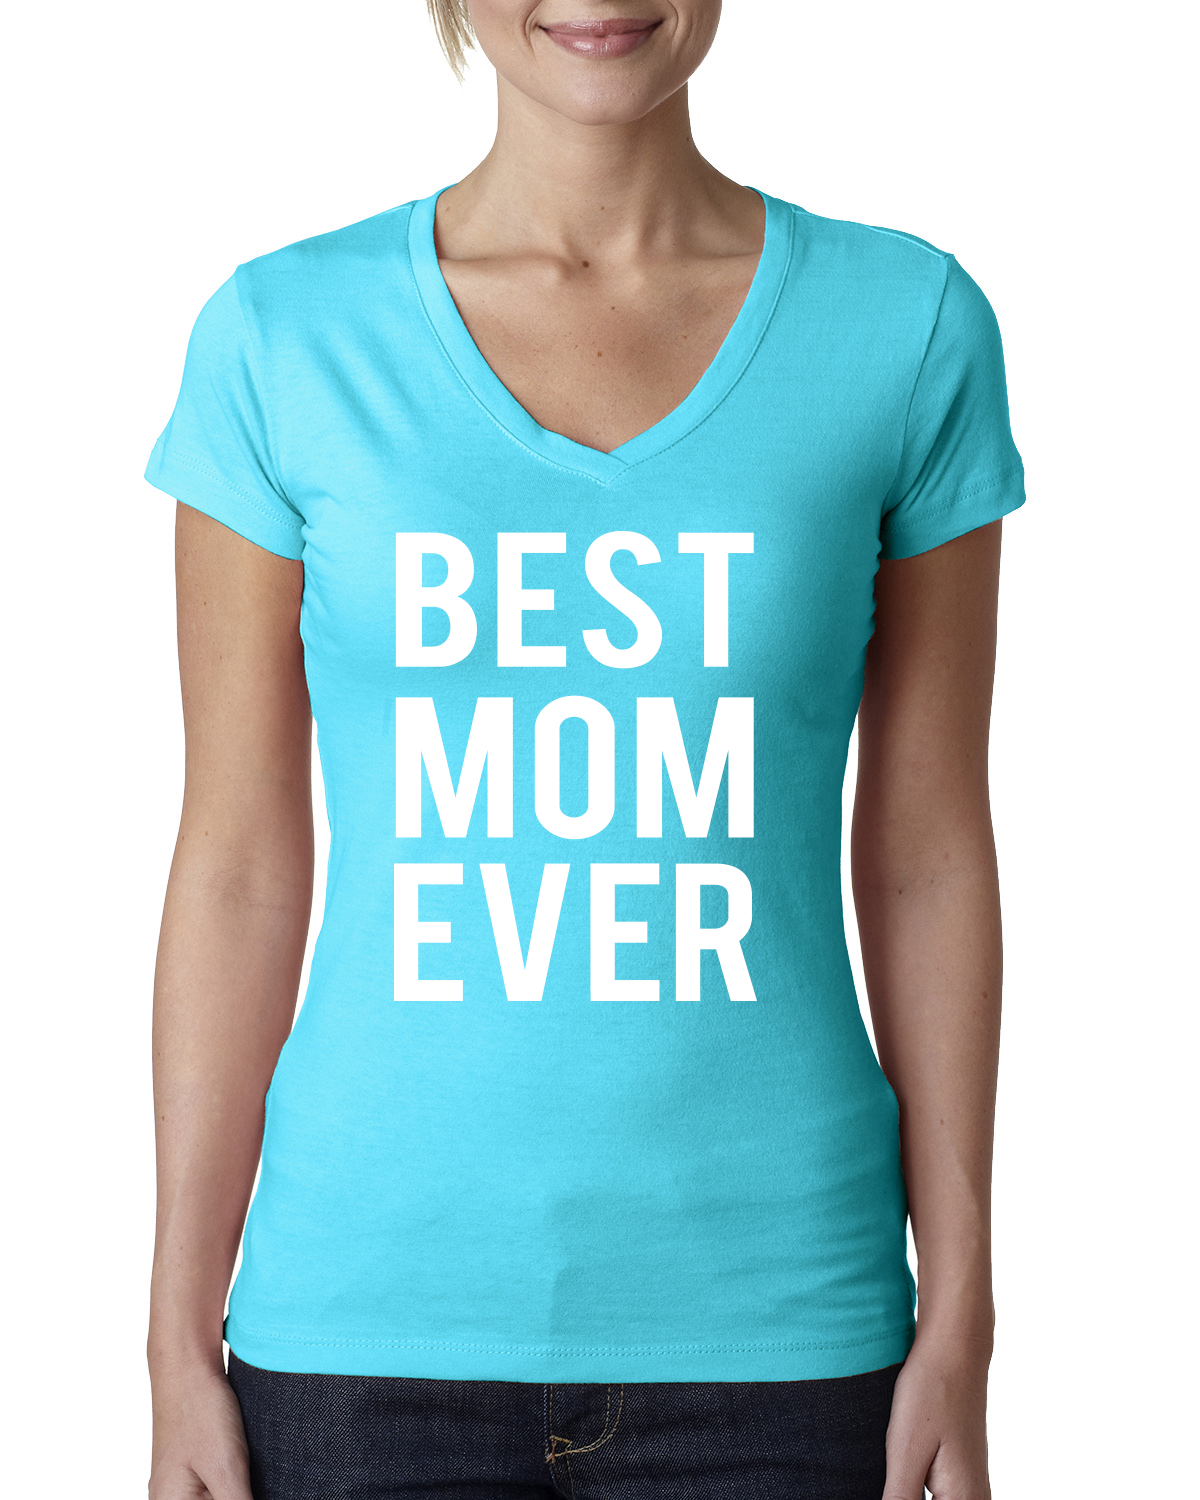 Wild Bobby, Best Mom Ever Mothers Day Gift, Mother's Day, Women Junior Fit V-Neck Tee, Tahiti Blue, X-Large - image 1 of 3